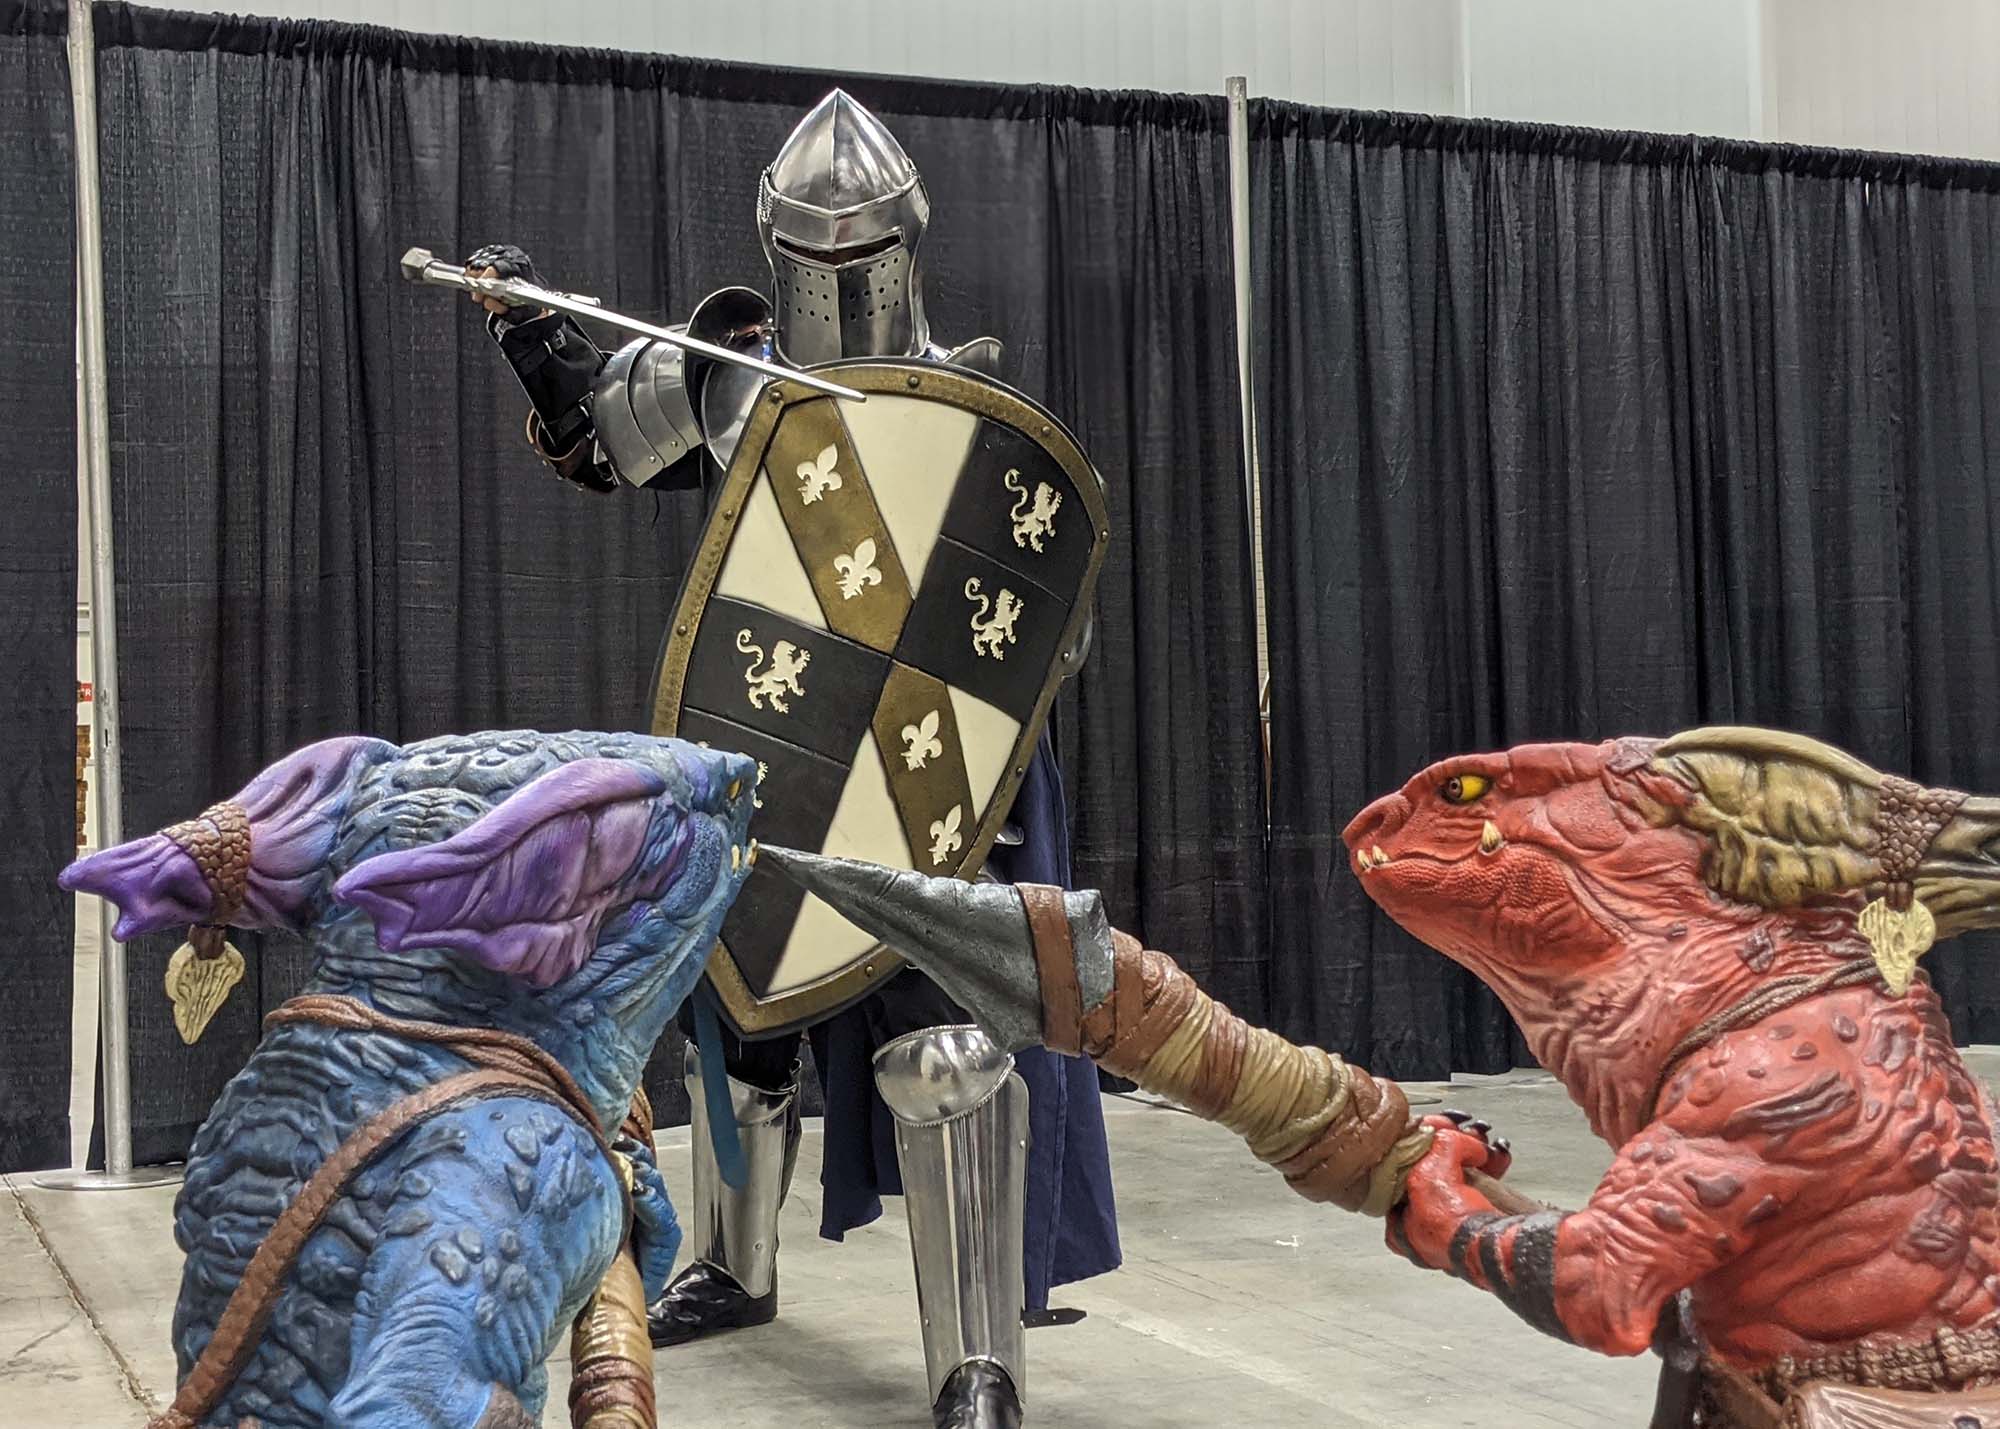 A person dressed in knight's armor facing off against two life sized foam kobolds